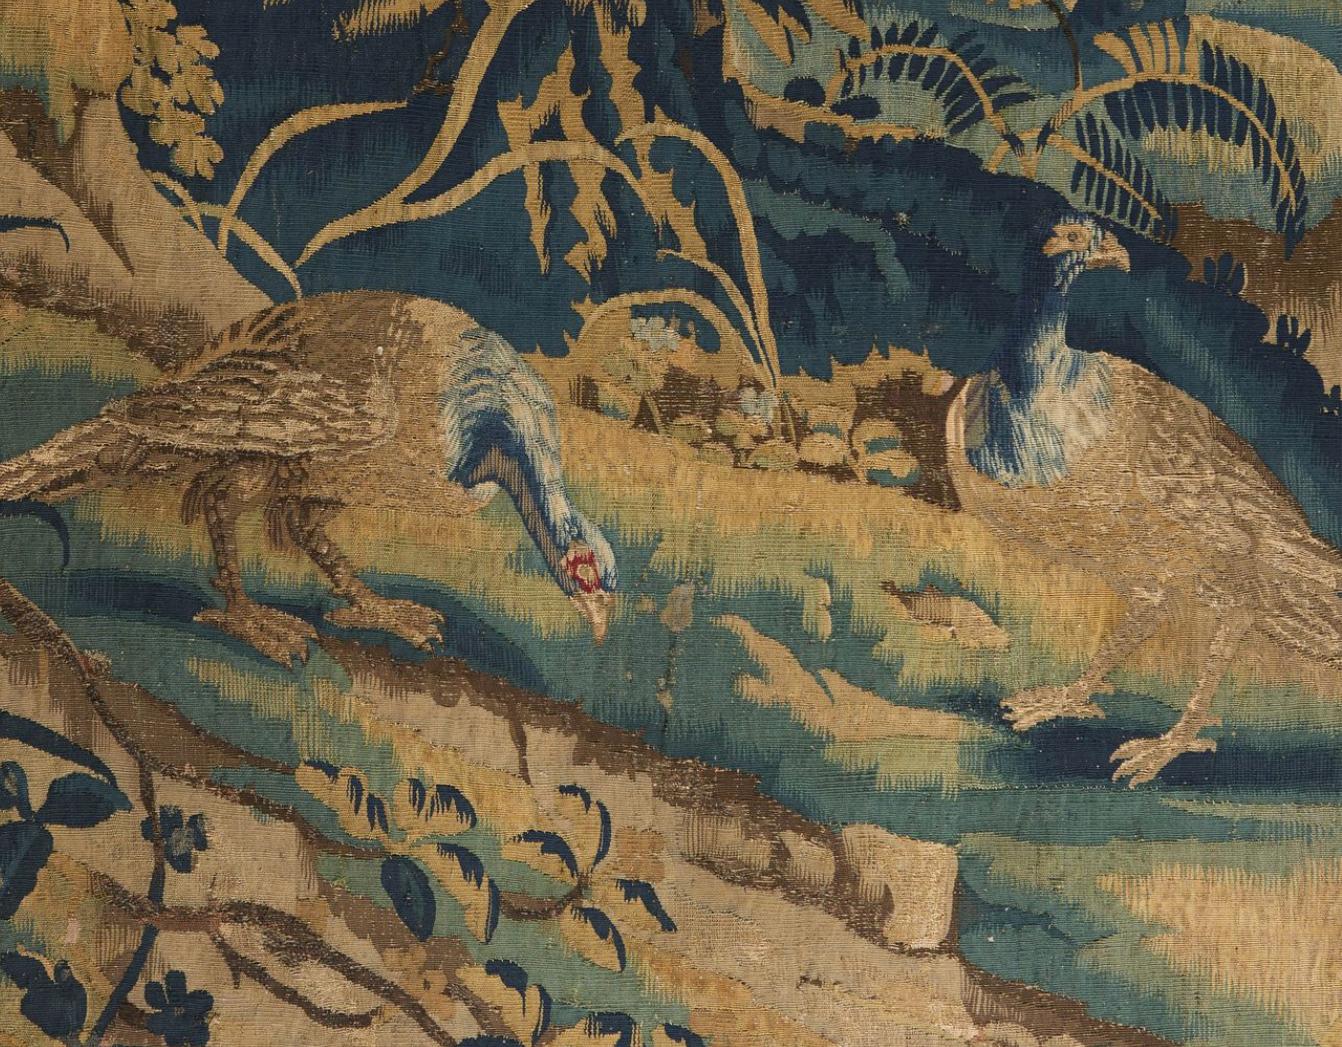 A fine eighteenth century verdure tapestry with lively greenery throughout showing dappled light on the trees, with a pair of pheasants in the foreground, and a clearing in the background, all in perspective and surrounded by lush vegetation. The